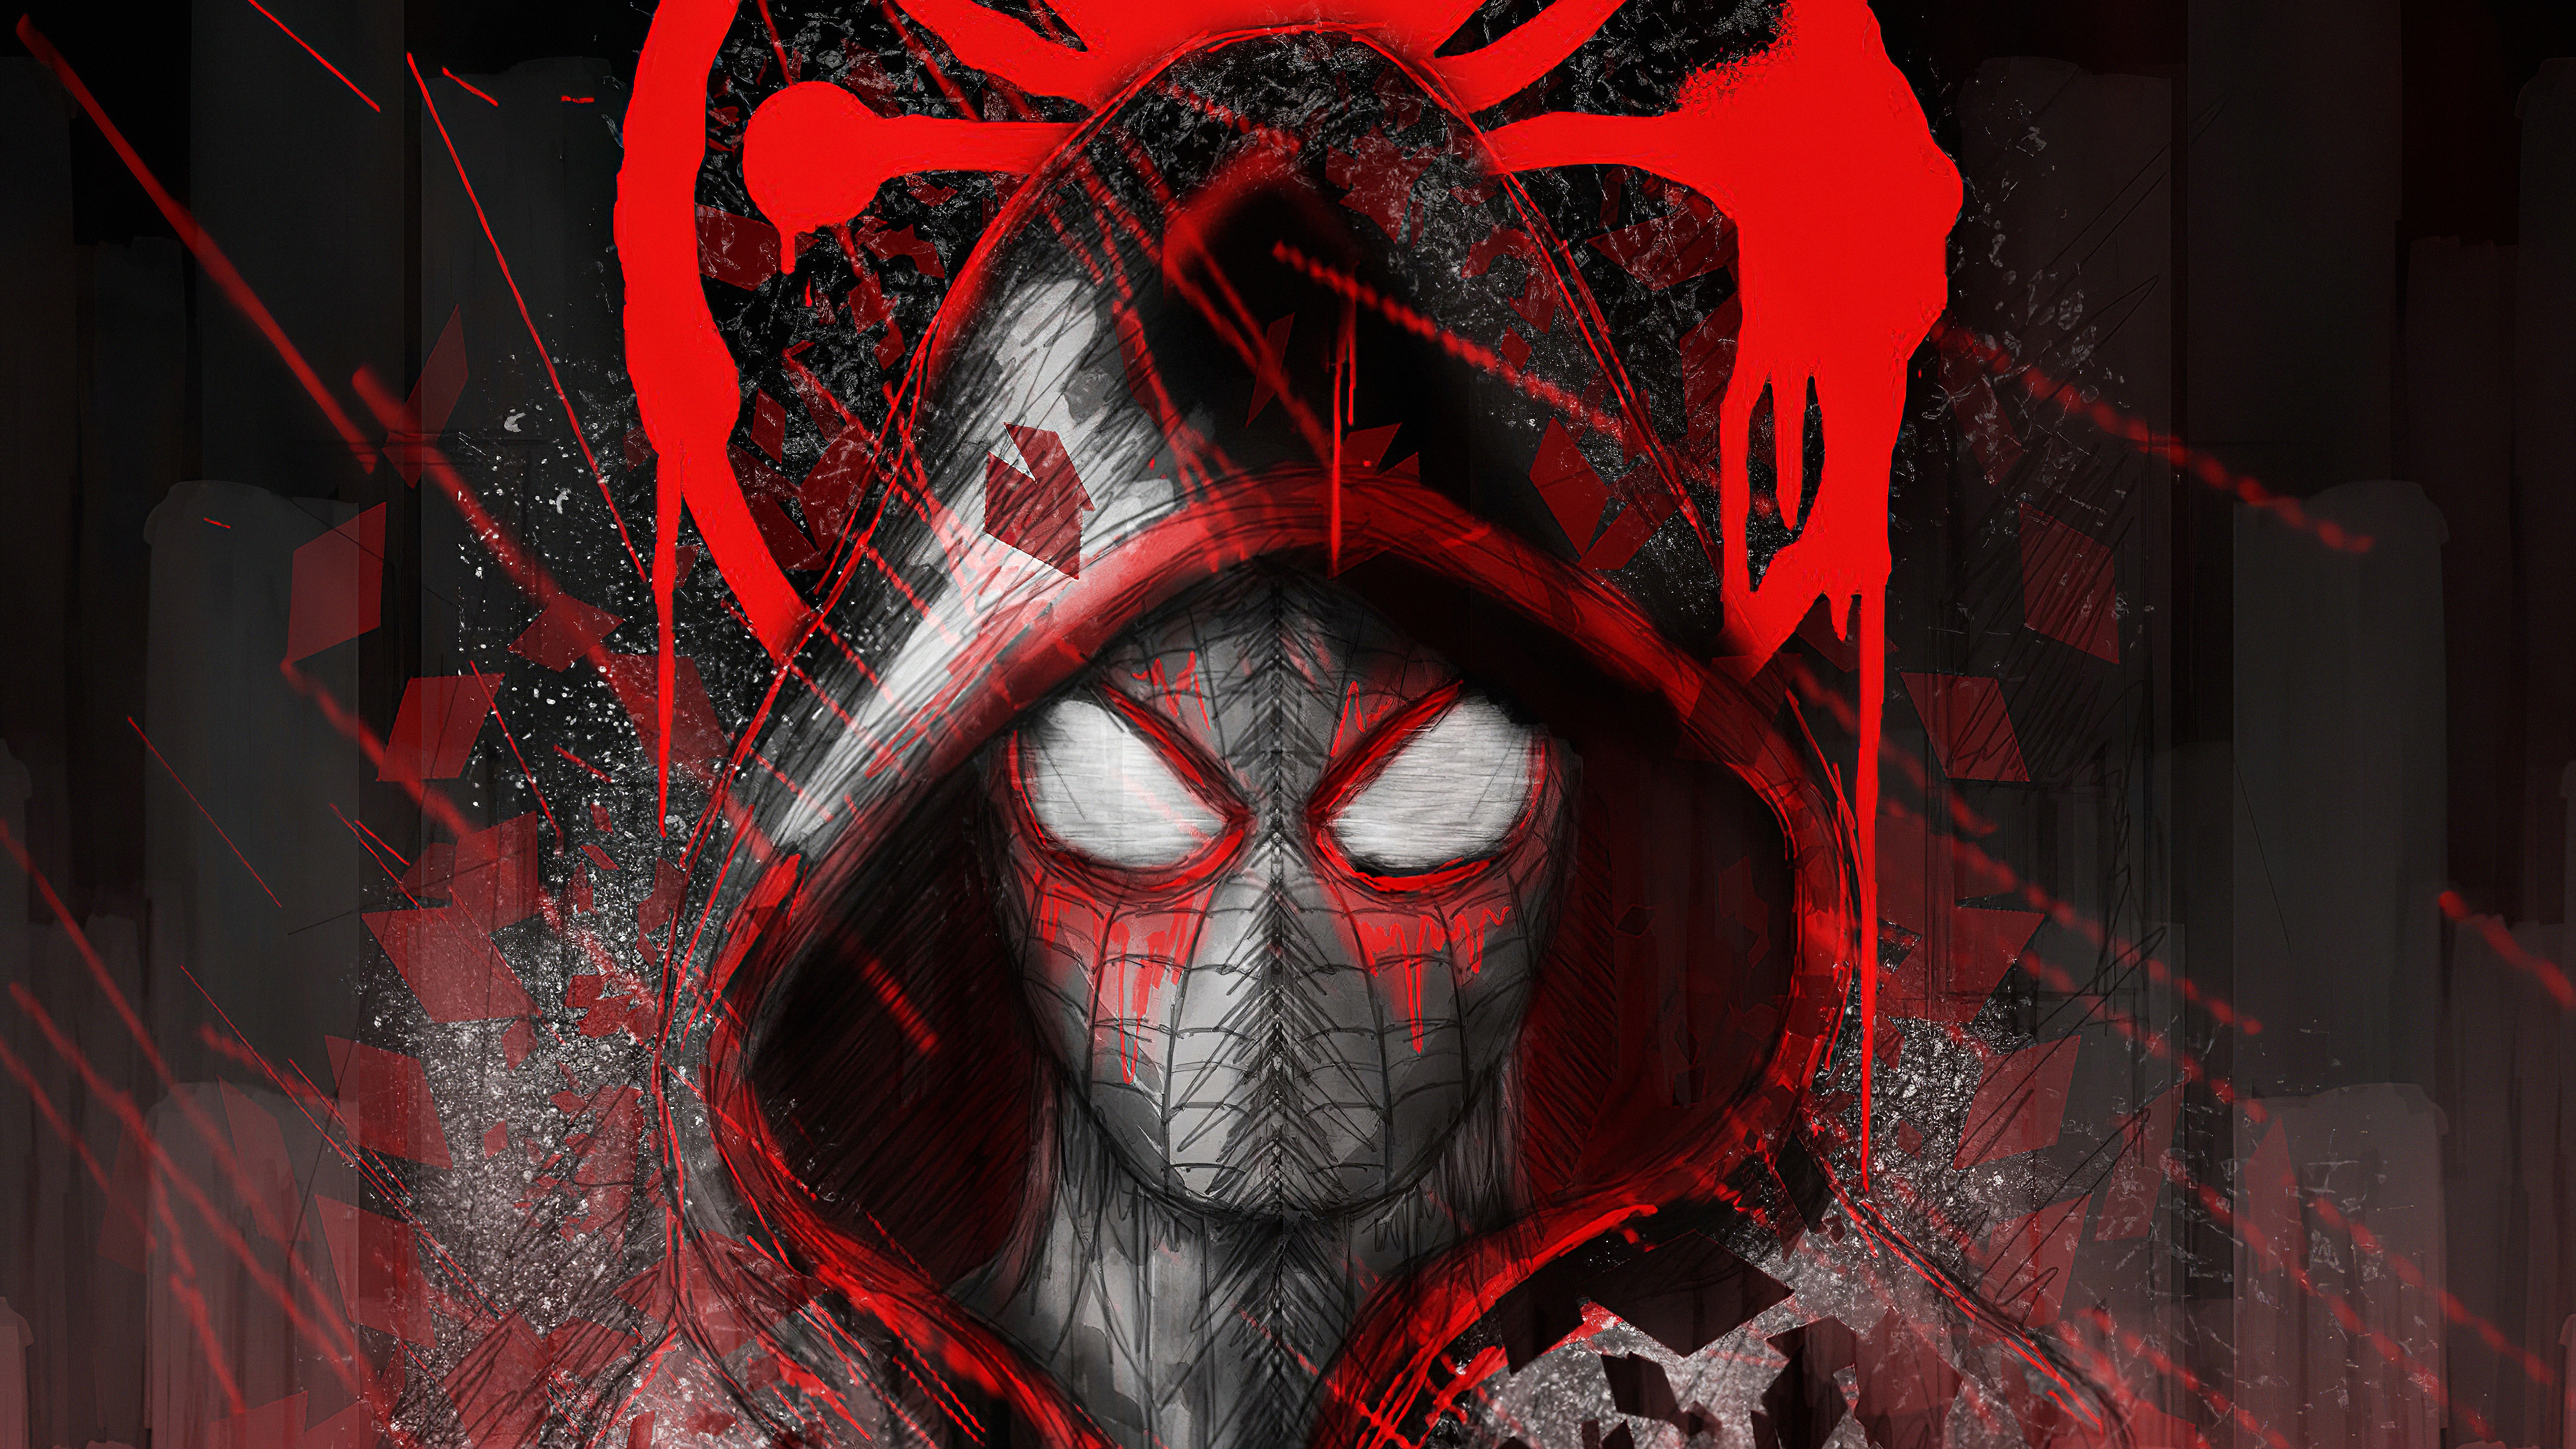 Wallpaper 4K Ultra Hd Spiderman Images - We hope you enjoy our variety